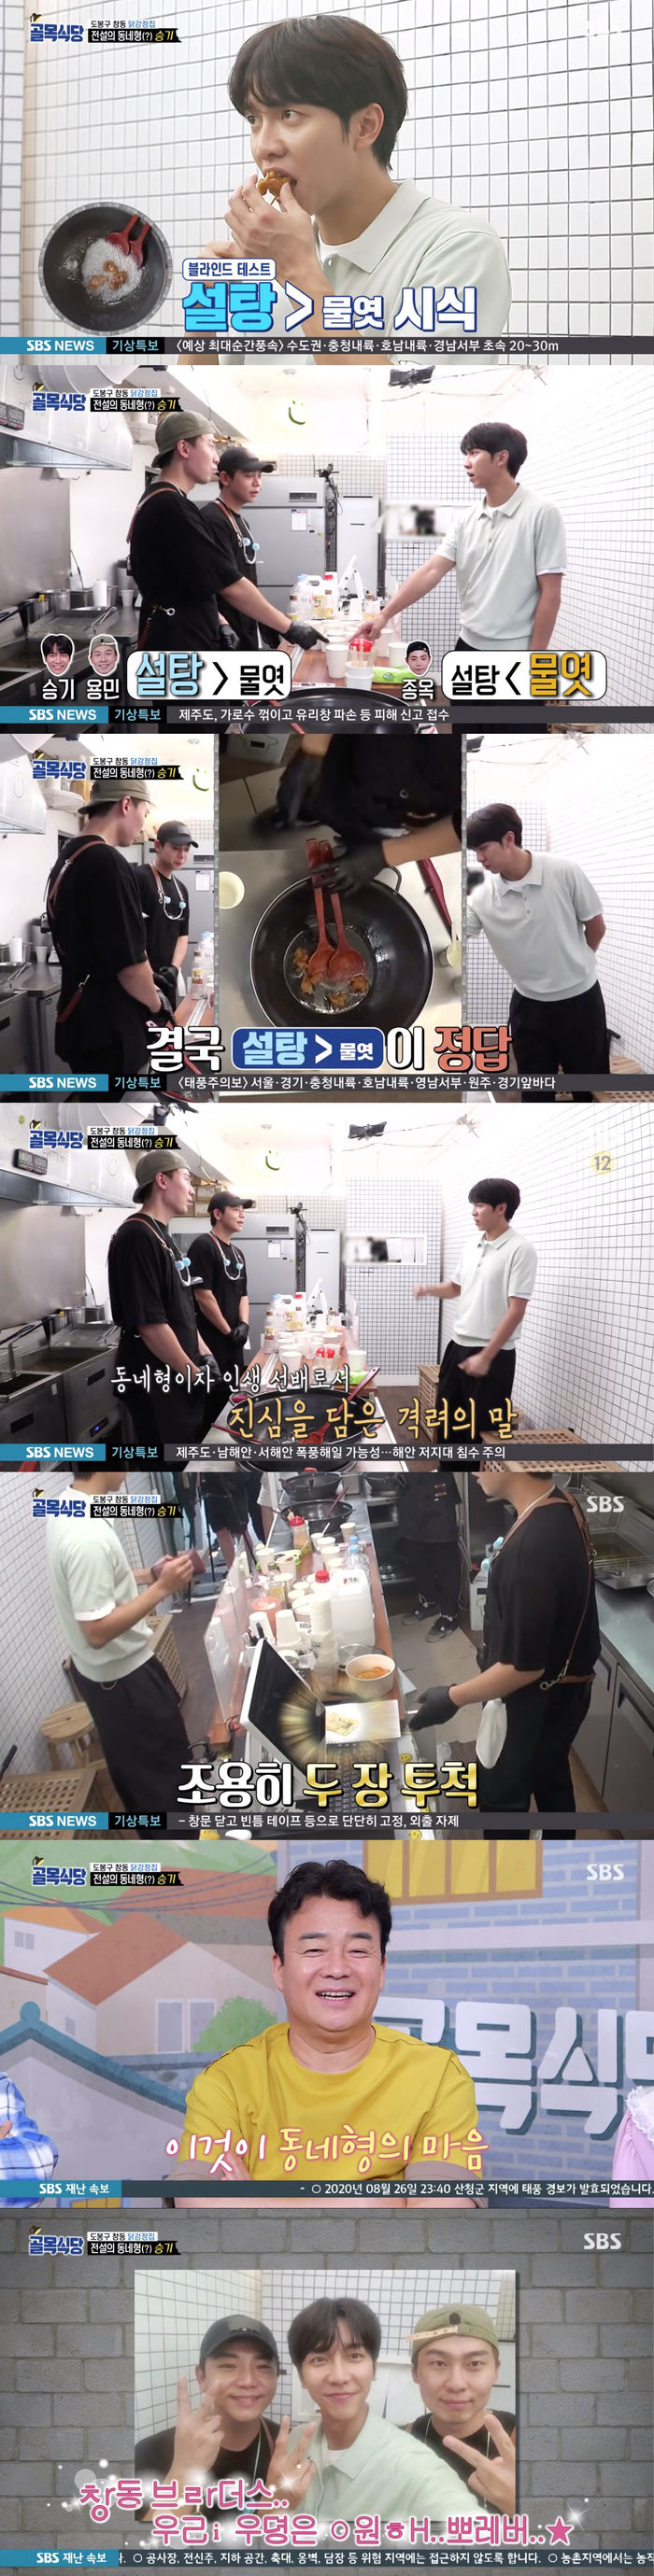 Lee Seung-gi sent warm Cheering to her neighborhood juniorsOn SBS Baek Jong-wons The Alley Restaurant (hereinafter referred to as The Alley Restaurant), a solution was made to save the Chang-dong alley market.On the day of the broadcast, Baek Jong-won suggested Lee Seung-gi to visit Sweet and sour chicken house.He Cheering his intellectually depressed Sweet and sour chicken bosses and asked them not to spare any advice if they had anything to point out.Lee Seung-gi took responsibility for finding Sweet and sour chicen houses; the bosses showed a bigger reaction than ever on Lee Seung-gis visit.And Lee Seung-gi gave a friendly consolation to the nervous and depressed boss.The bosses, who were studying the ratio of sugar and starch syrup after the point of Baek Jong-won, presented three versions of Sweet and sour chicken to Lee Seung-gi.Lee Seung-gi, who tasted all three versions, said, Would not all people taste the same? Lets pick out what is best if you do one or two.Lee Seung-gi and one boss chose more sugar ratios, and one boss chose a high percentage of starch syrup.Lee Seung-gi once again ate a lot of starch syrup, and he asked, Is chicken first or sweetness of Gangjeong first in Sweet and sour chicken?If the chicken of Sweet and sour chicken is first, it seems that the sugary side is right.This side is crisp on the outside and I feel the chicken taste properly, so it seems good. I am uncomfortable because I have a lot of syrup, he said. It was much better to have a lot of sugar.But I think I will worry about living if I have a lot of syrup. MCs who watched this were impressed by clearly student chairman style. Baek Jong-won said, One side chooses another, so you eat it again.If I were like me, they chose it, and then this would be over. Sweet and sour chicken House bosses have expressed their regrets for not showing the perfect Sweet and sour chicken.Lee Seung-gi said, This is more special, I hope it works really well, do not cry and fight.And he said, Successful people are not successful. I think it would be better to grow there after accepting Mr. Baeks words.And I think it will be possible enough, he shouted Chang-dong fighting.He also said he would pay the cash, which was several times the value of Sweet and sour chicken, which made the boss embarrassed.Lee Seung-gi said: You dont have to give me change, I want to give more, and so do you.I think I will not be able to live much, but buy the ingredients and practice more. Also on this day, Cho Kyuhyun sampled the tuna pizza and salami pizza from the Pizza house.I do not feel tuna Pizza unlike Imaginary, but I am just impressed and I do not think it is, he said.The red pepper oil is not very spicy, he said. And I made a lot of red pepper oil and I used it.There is no impression that Pizza tastes special as the pepper oil goes in. Cho Kyuhyun pointed out that toppings are separated and the thickness remains in pepper oil about the problems of Pizza house.Cho Kyuhyun asked the boss if he could overcook by raising the heat to learn more Pizza.And Baek Jong-won, who saw this, noticed the problem and contacted Cho Kyuhyun urgently.It is not because the topping is separated and the taste of pepper oil is not cooked properly. It is a problem caused by the amount of toppings now.Do not increase the amount, but keep the quantitative as you learned from Fabry and make Pizza again. So the boss made Pizza once again and Cho Kyuhyun was surprised to taste different from the Pizza he had eaten before: It was completely different from the previous one.It is so different that the ingredients are different. It is so delicious. The boss said, I do not think it is unconditionally good because there are many sheep.